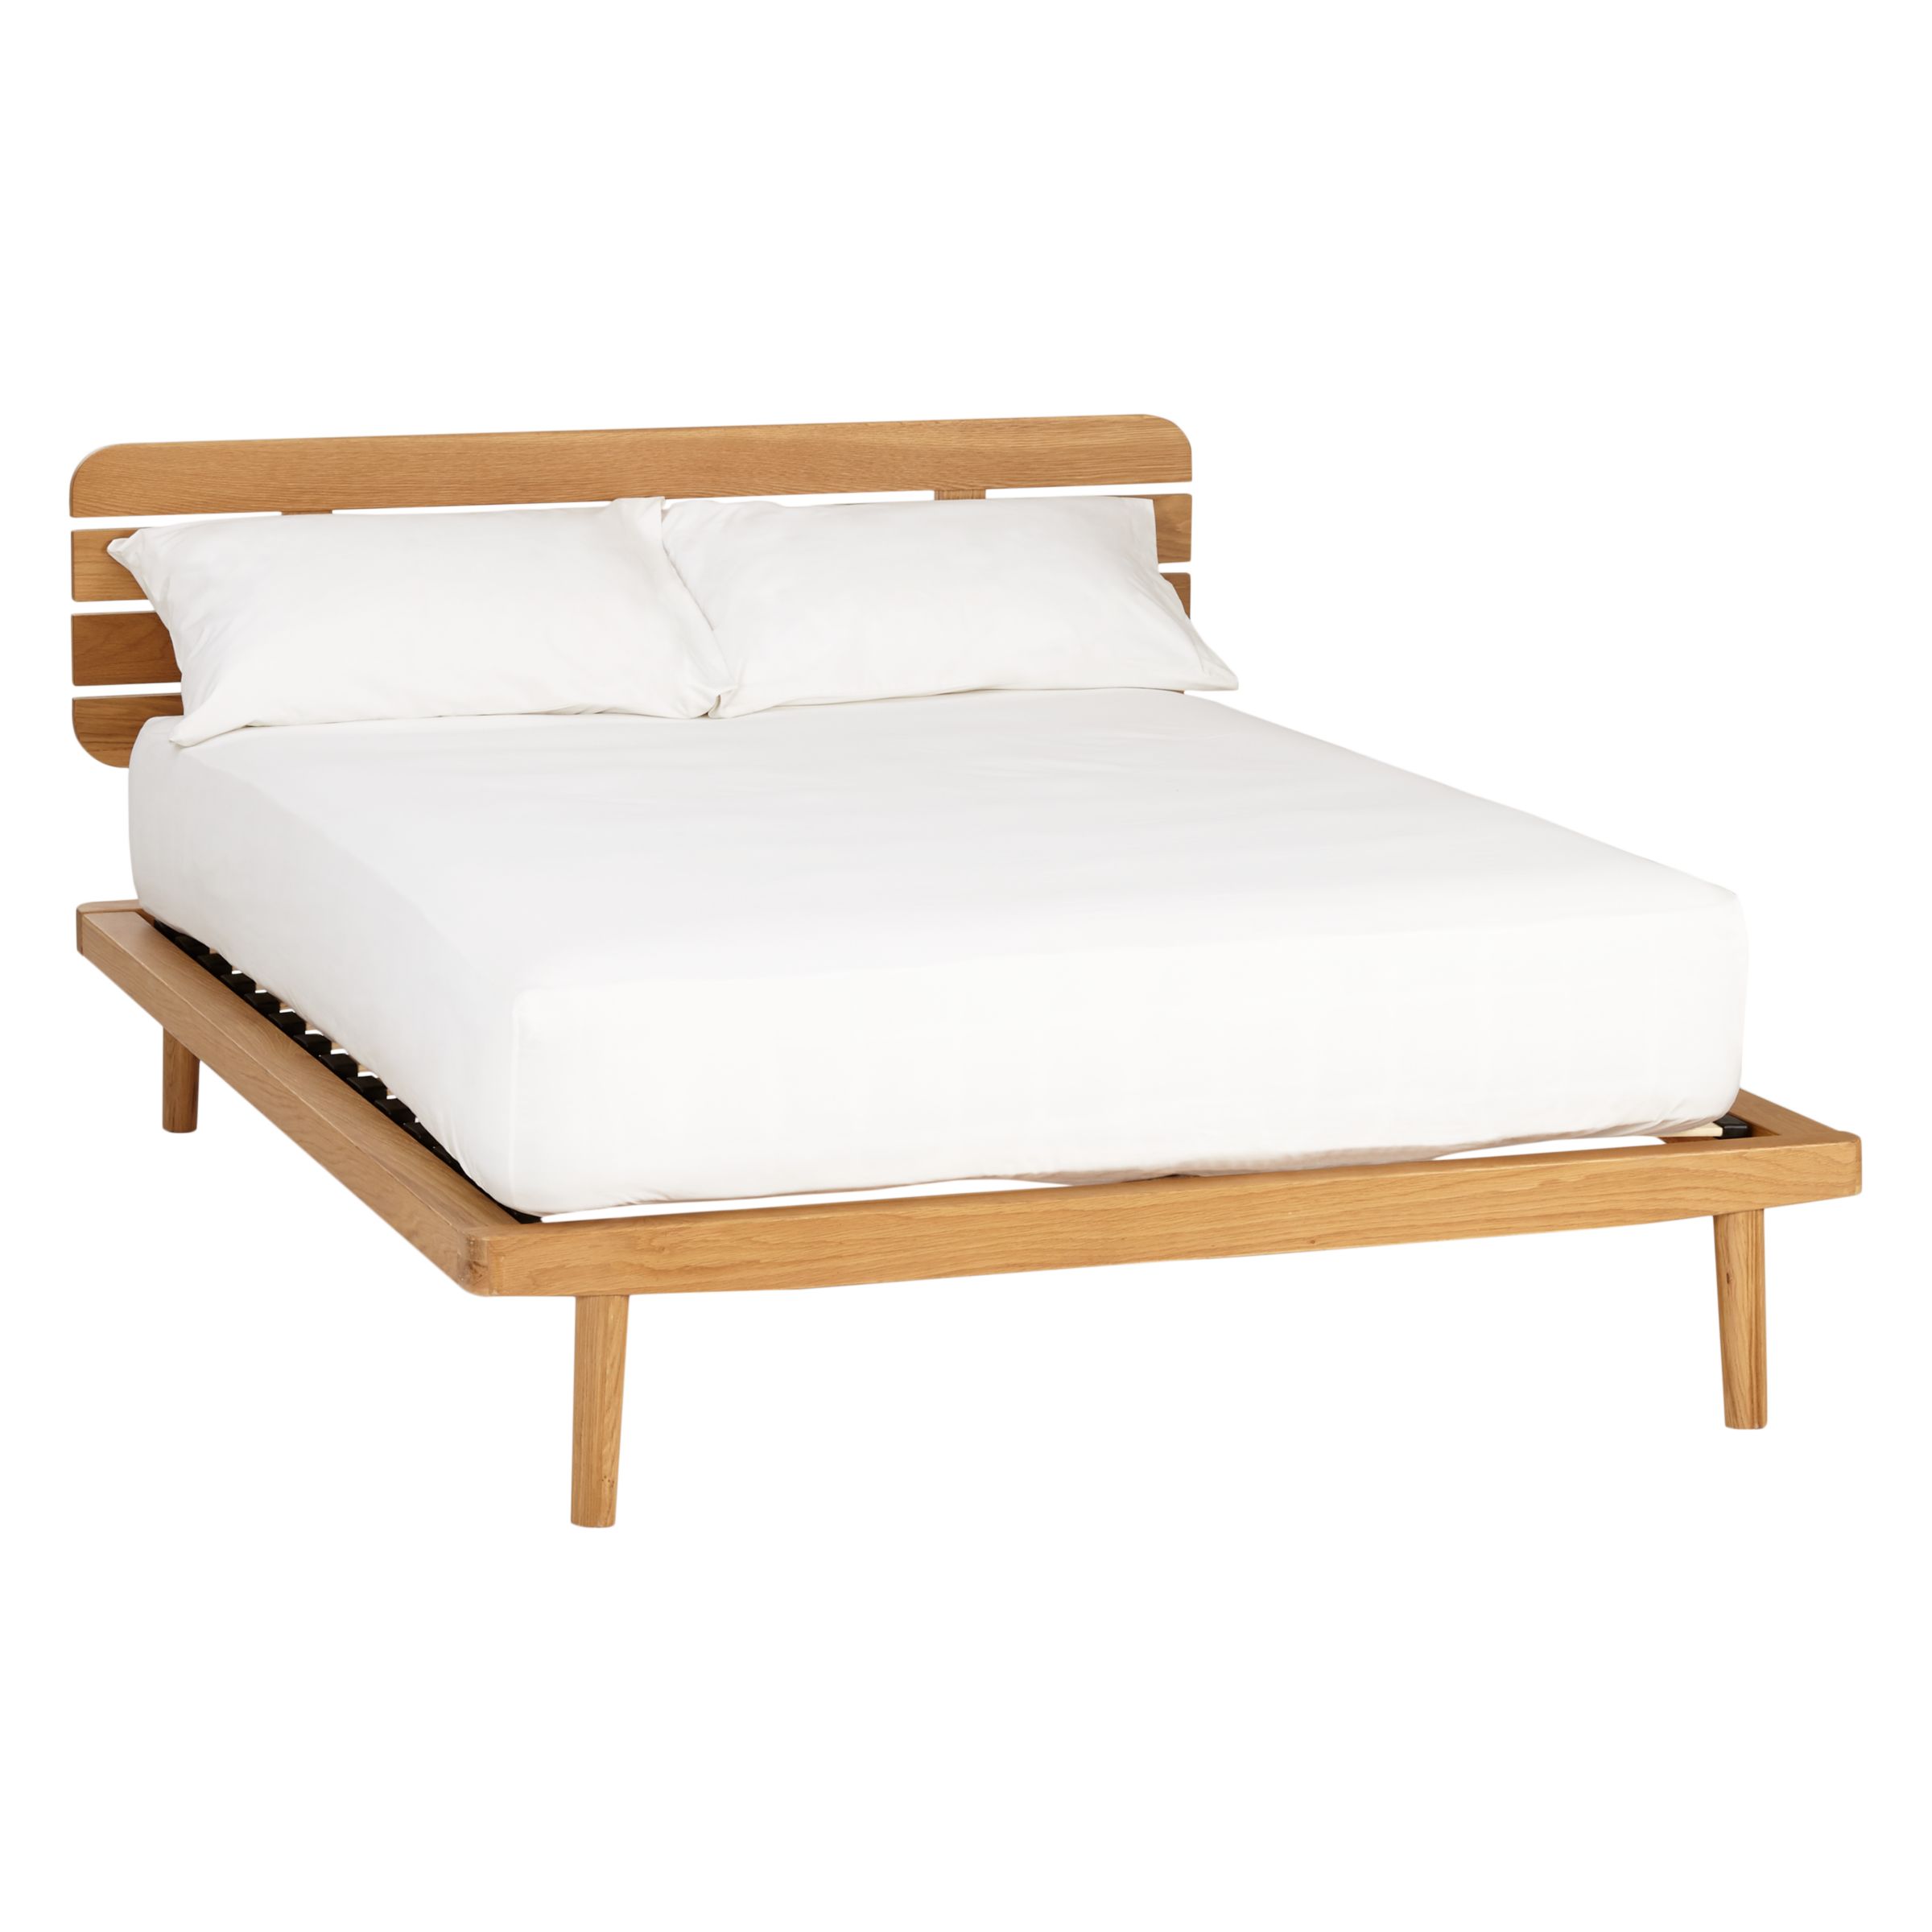 John Lewis Bow Slatted Headboard Bed Frame, Double, with Underbed Storage, Oak